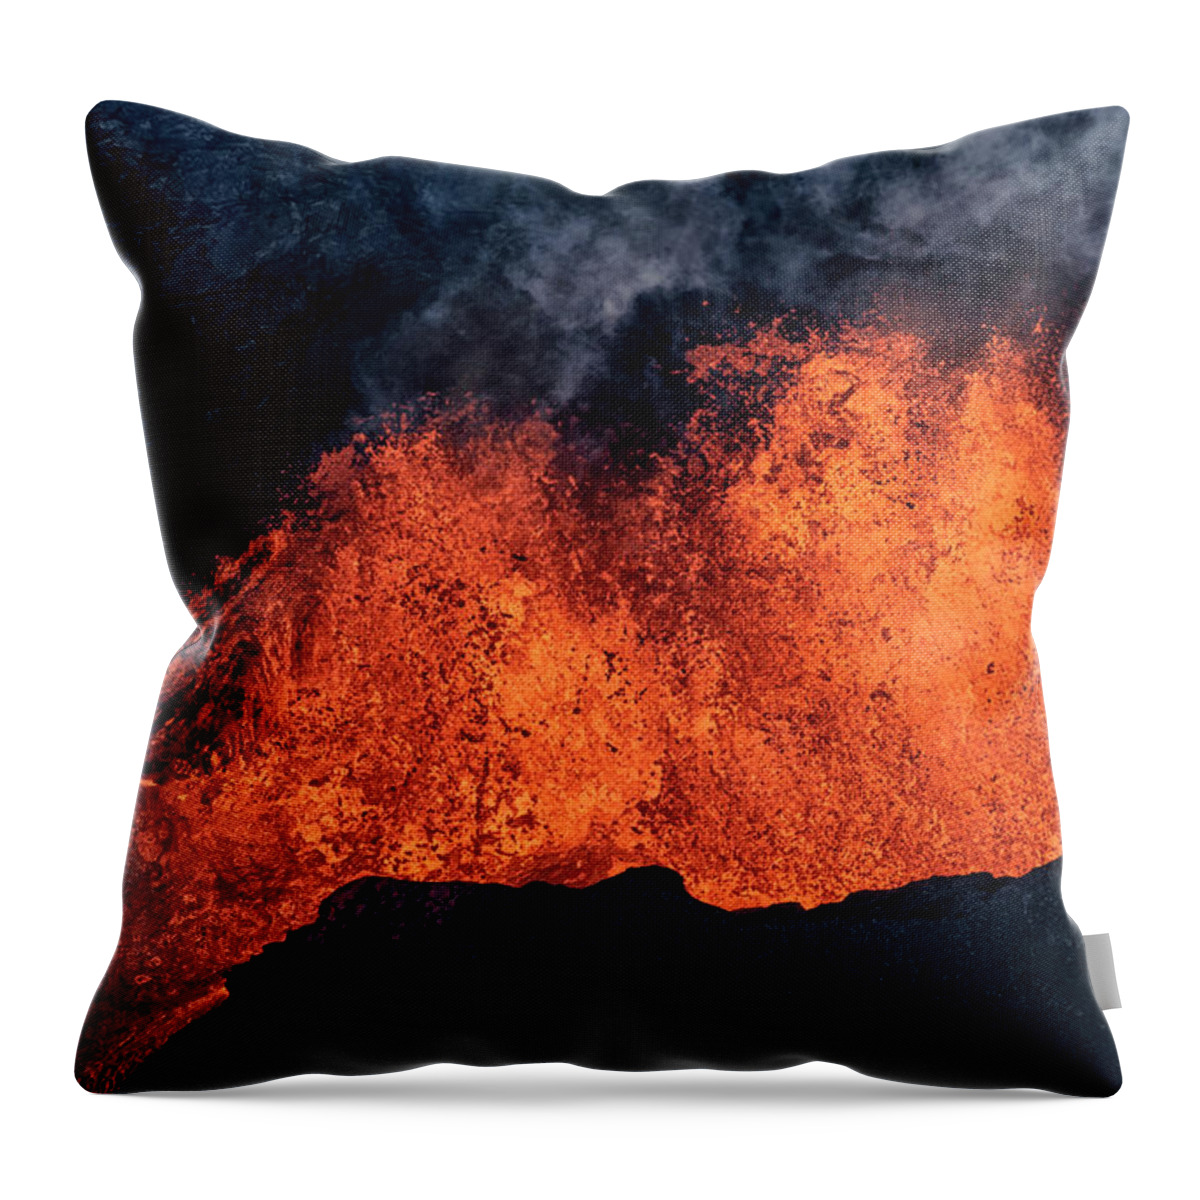 Fissure 8 Throw Pillow featuring the photograph Fissure 8 Close Up by Christopher Johnson